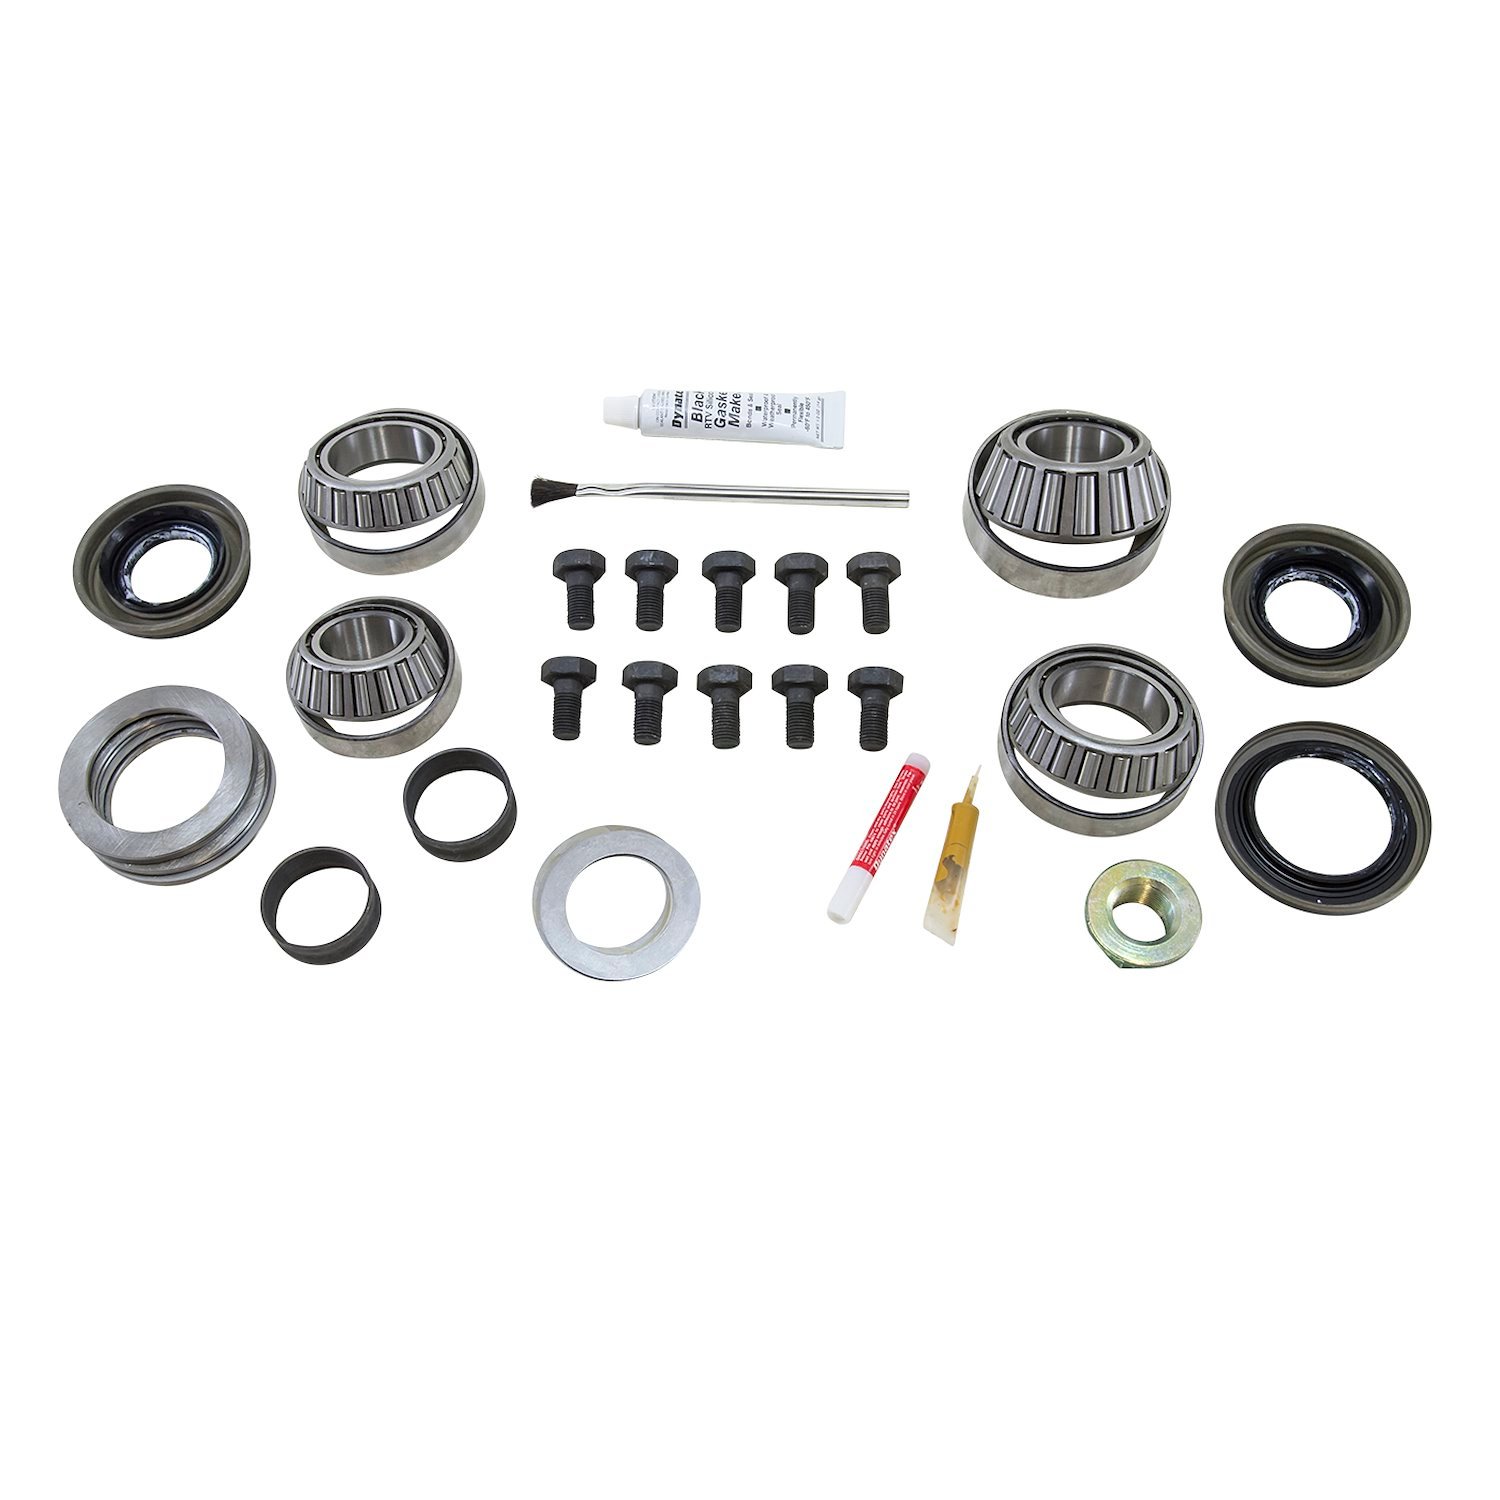 USA Standard 37144 Master Overhaul Kit, For GM Pontiac 7.75 in. Irs